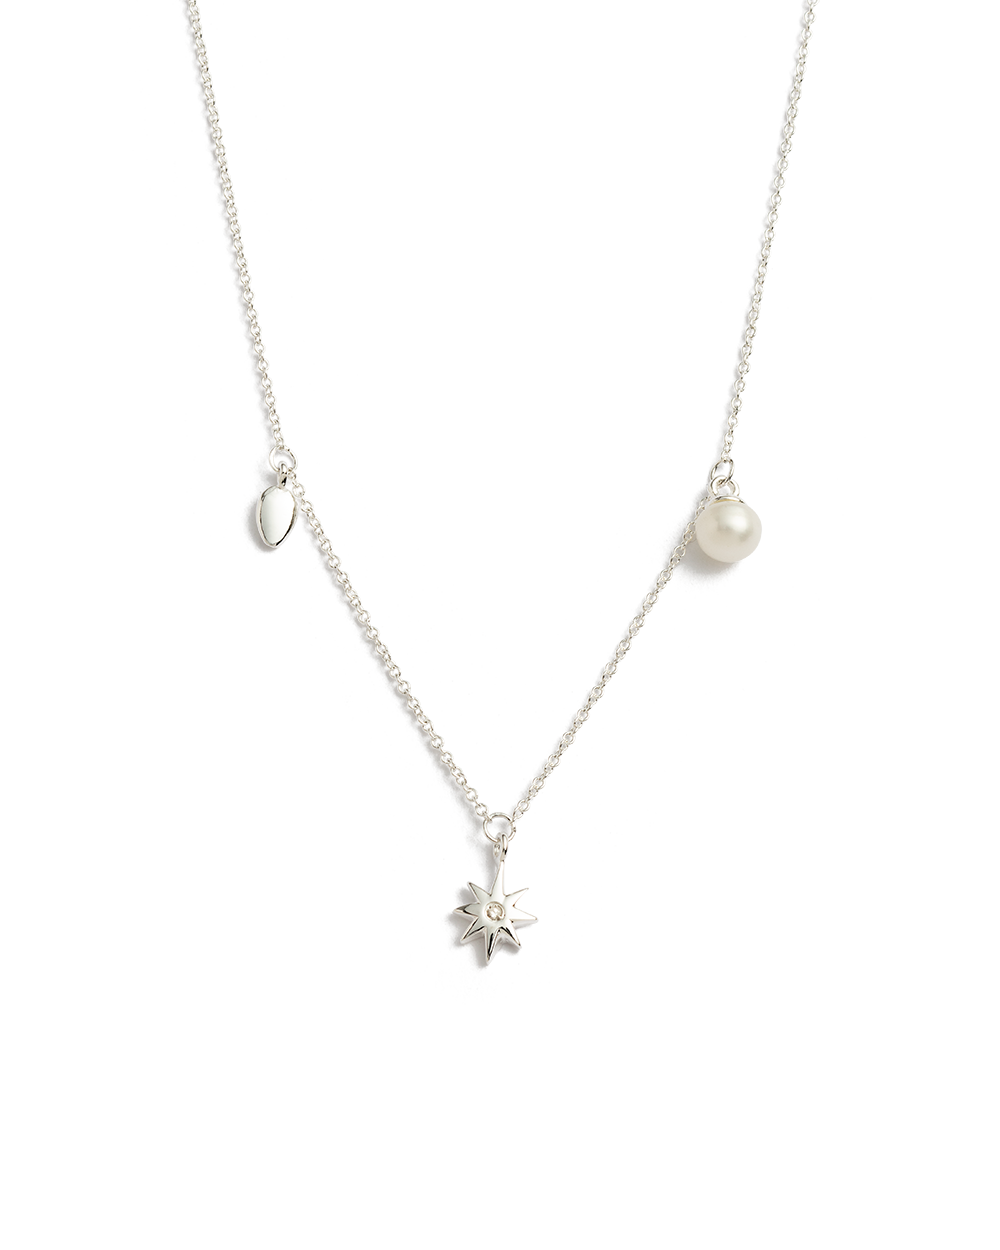 GUIDING STAR PEARL NECKLACE (STERLING SILVER) - IMAGE 1